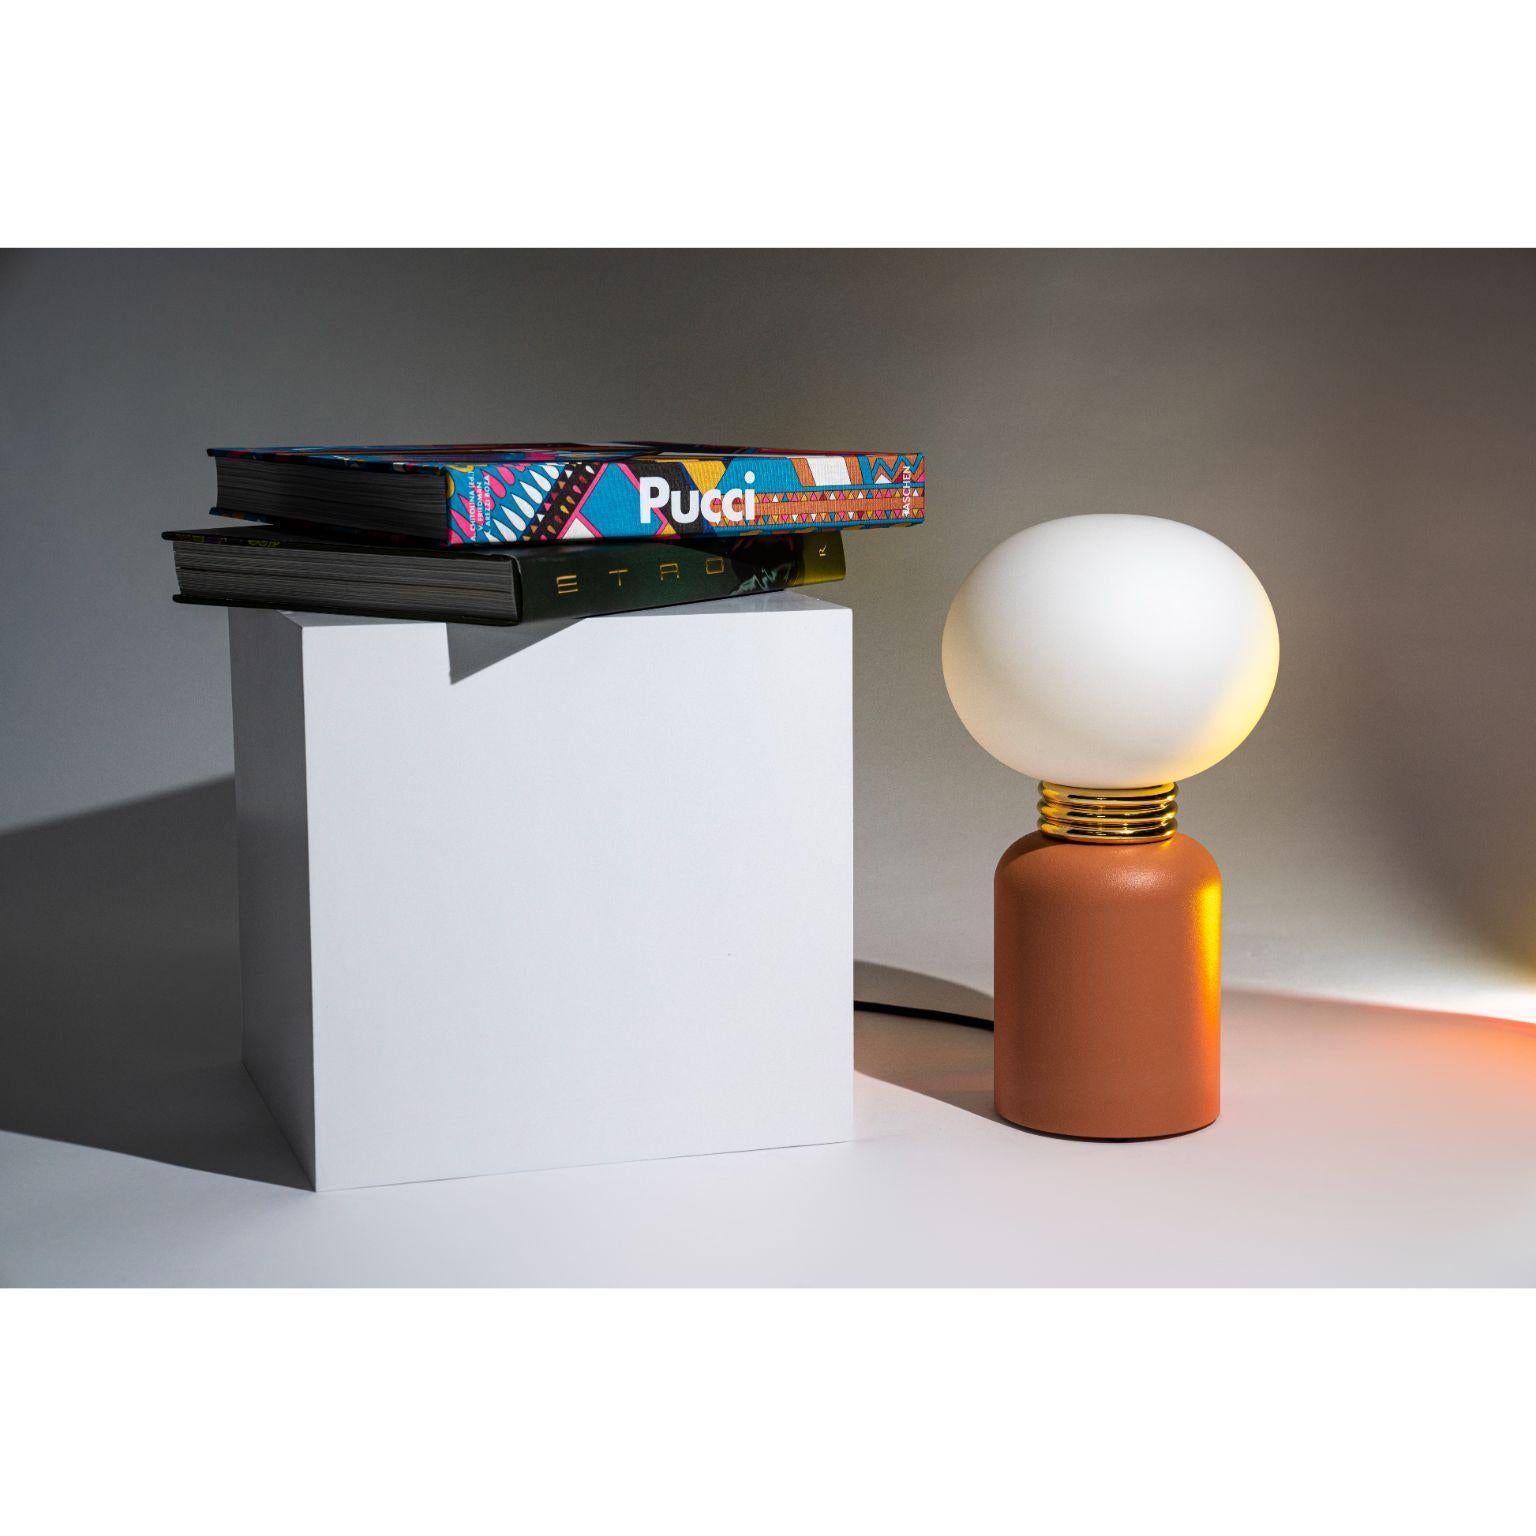 Karen table lamp S by Mason Editions.
Dimensions: Ø 19 cm x H 34 cm
Materials: Aluminum, blown glass white acid-etched.
Colours: Emerald green, aquamarine, cotto, taupe, pink, burgundy. Colors with upper case.

All our lamps can be wired